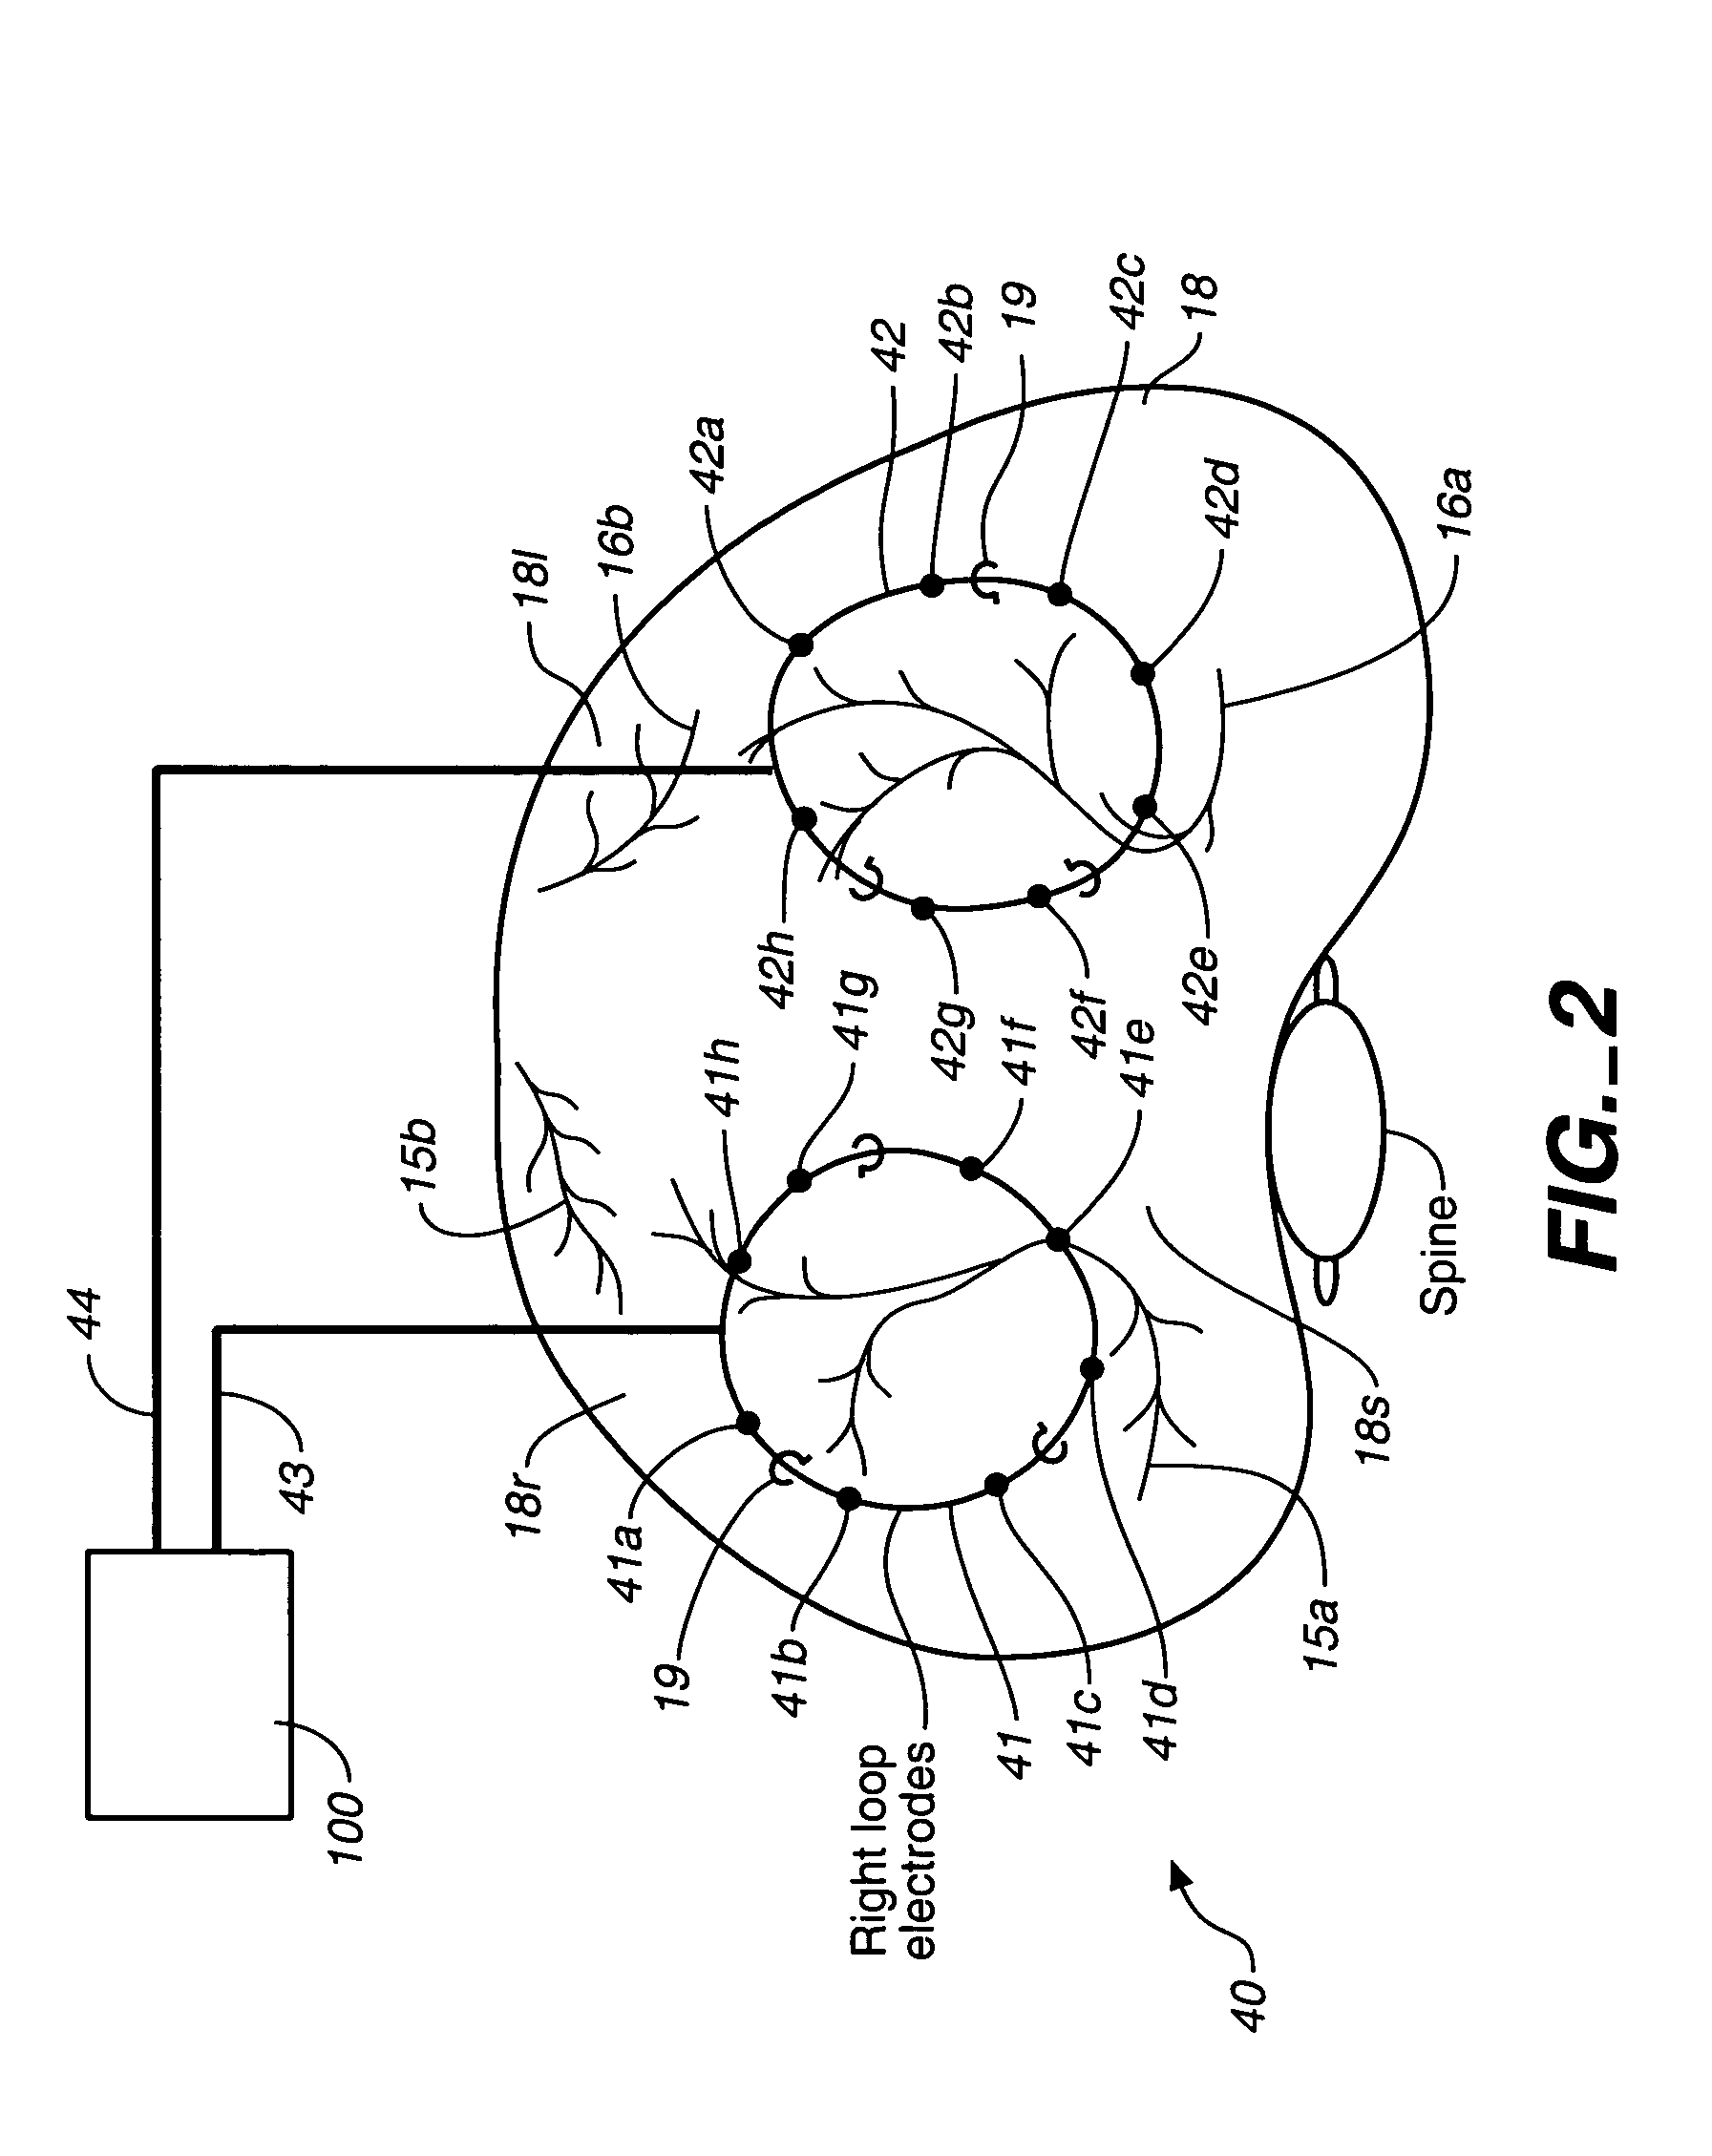 Breathing disorder detection and therapy delivery device and method